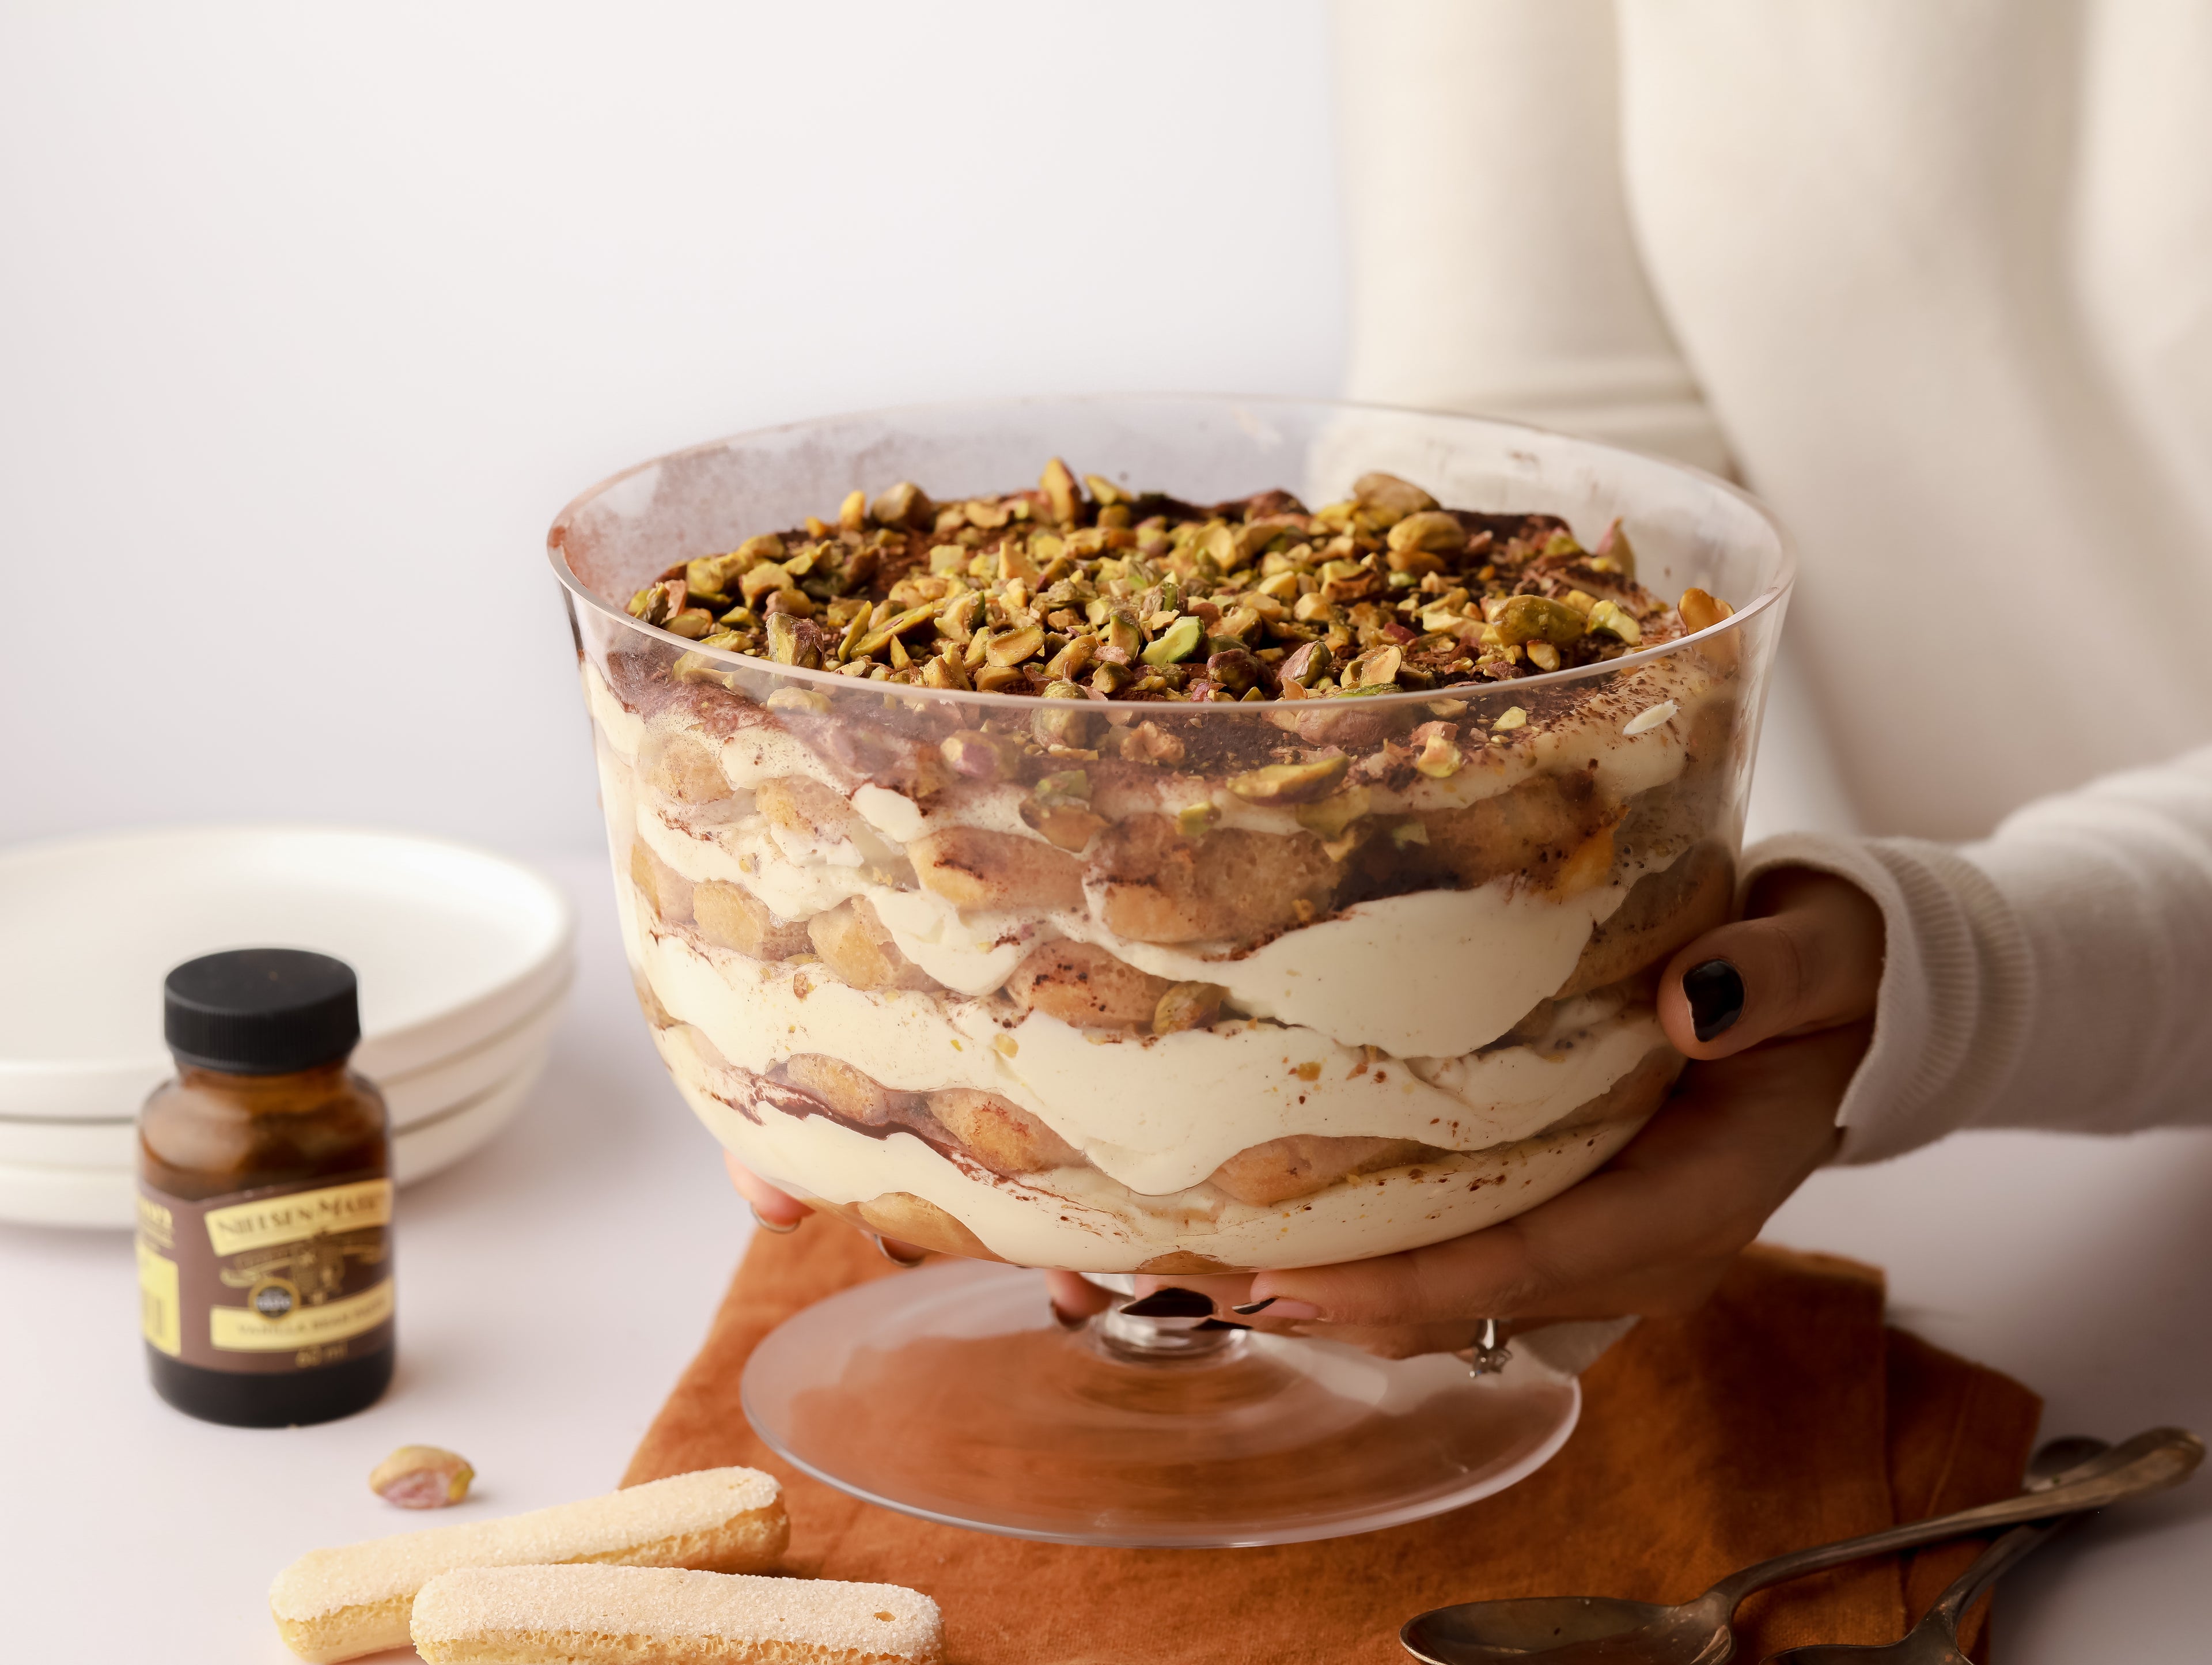 Large bowl of trifle being held by two hands beside a jar of vanilla bean paste